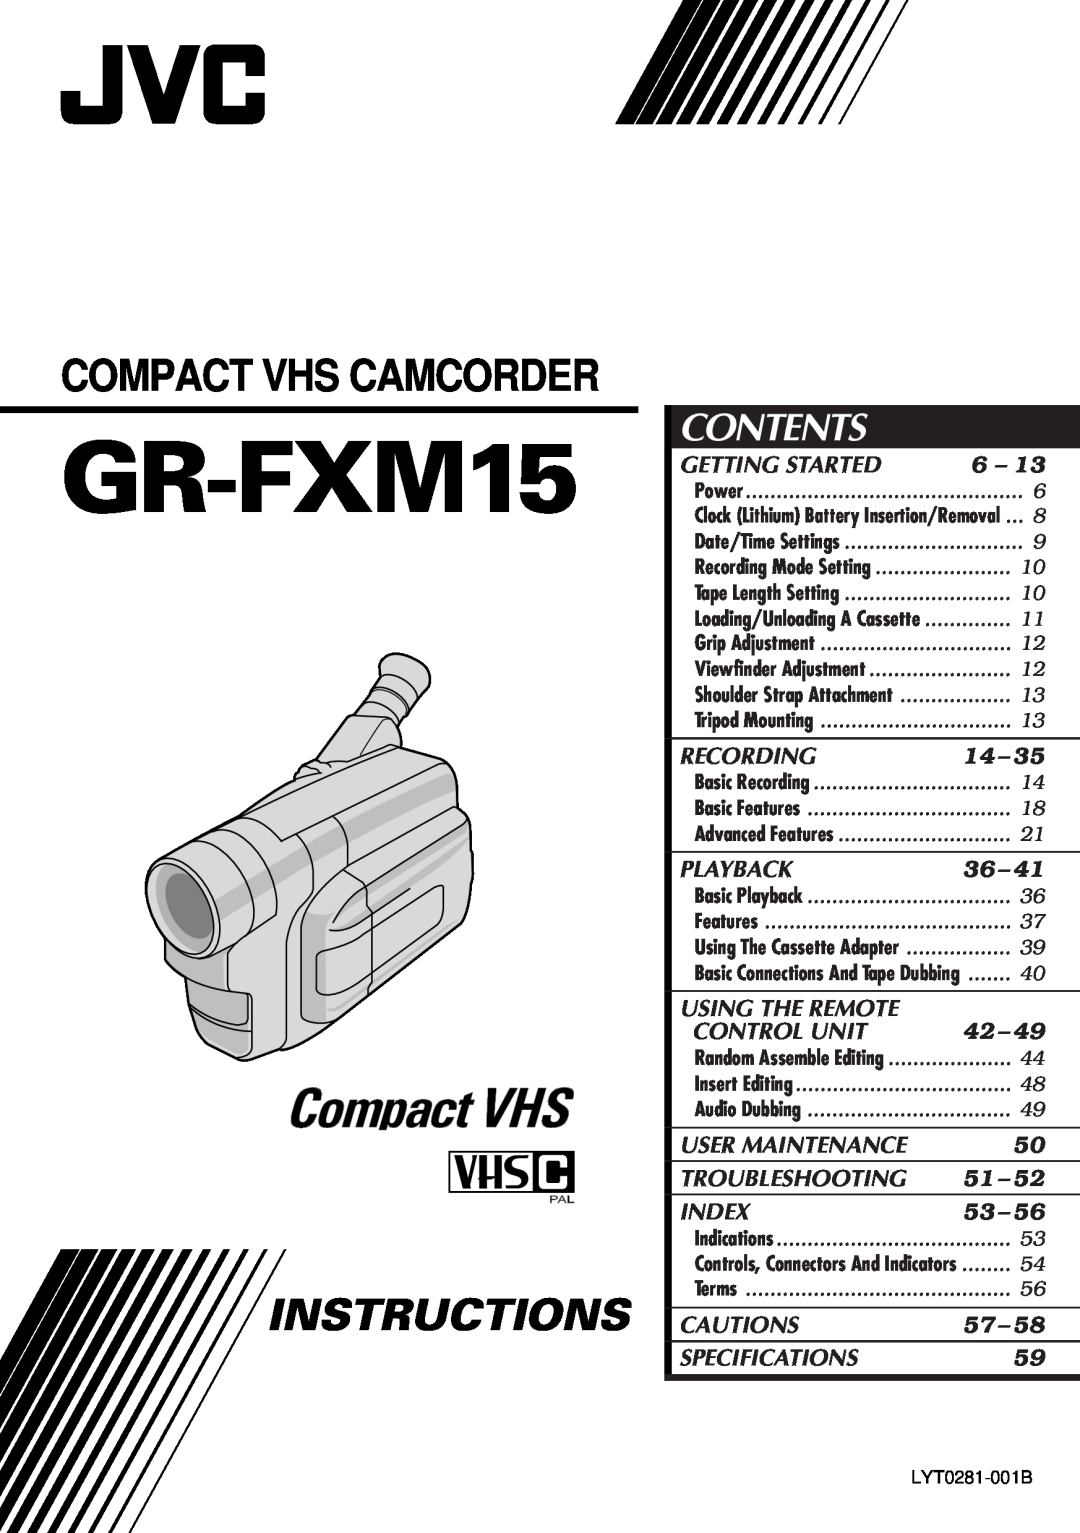 JVC GR-FXM15 specifications Contents, Instructions, Compact Vhs Camcorder 